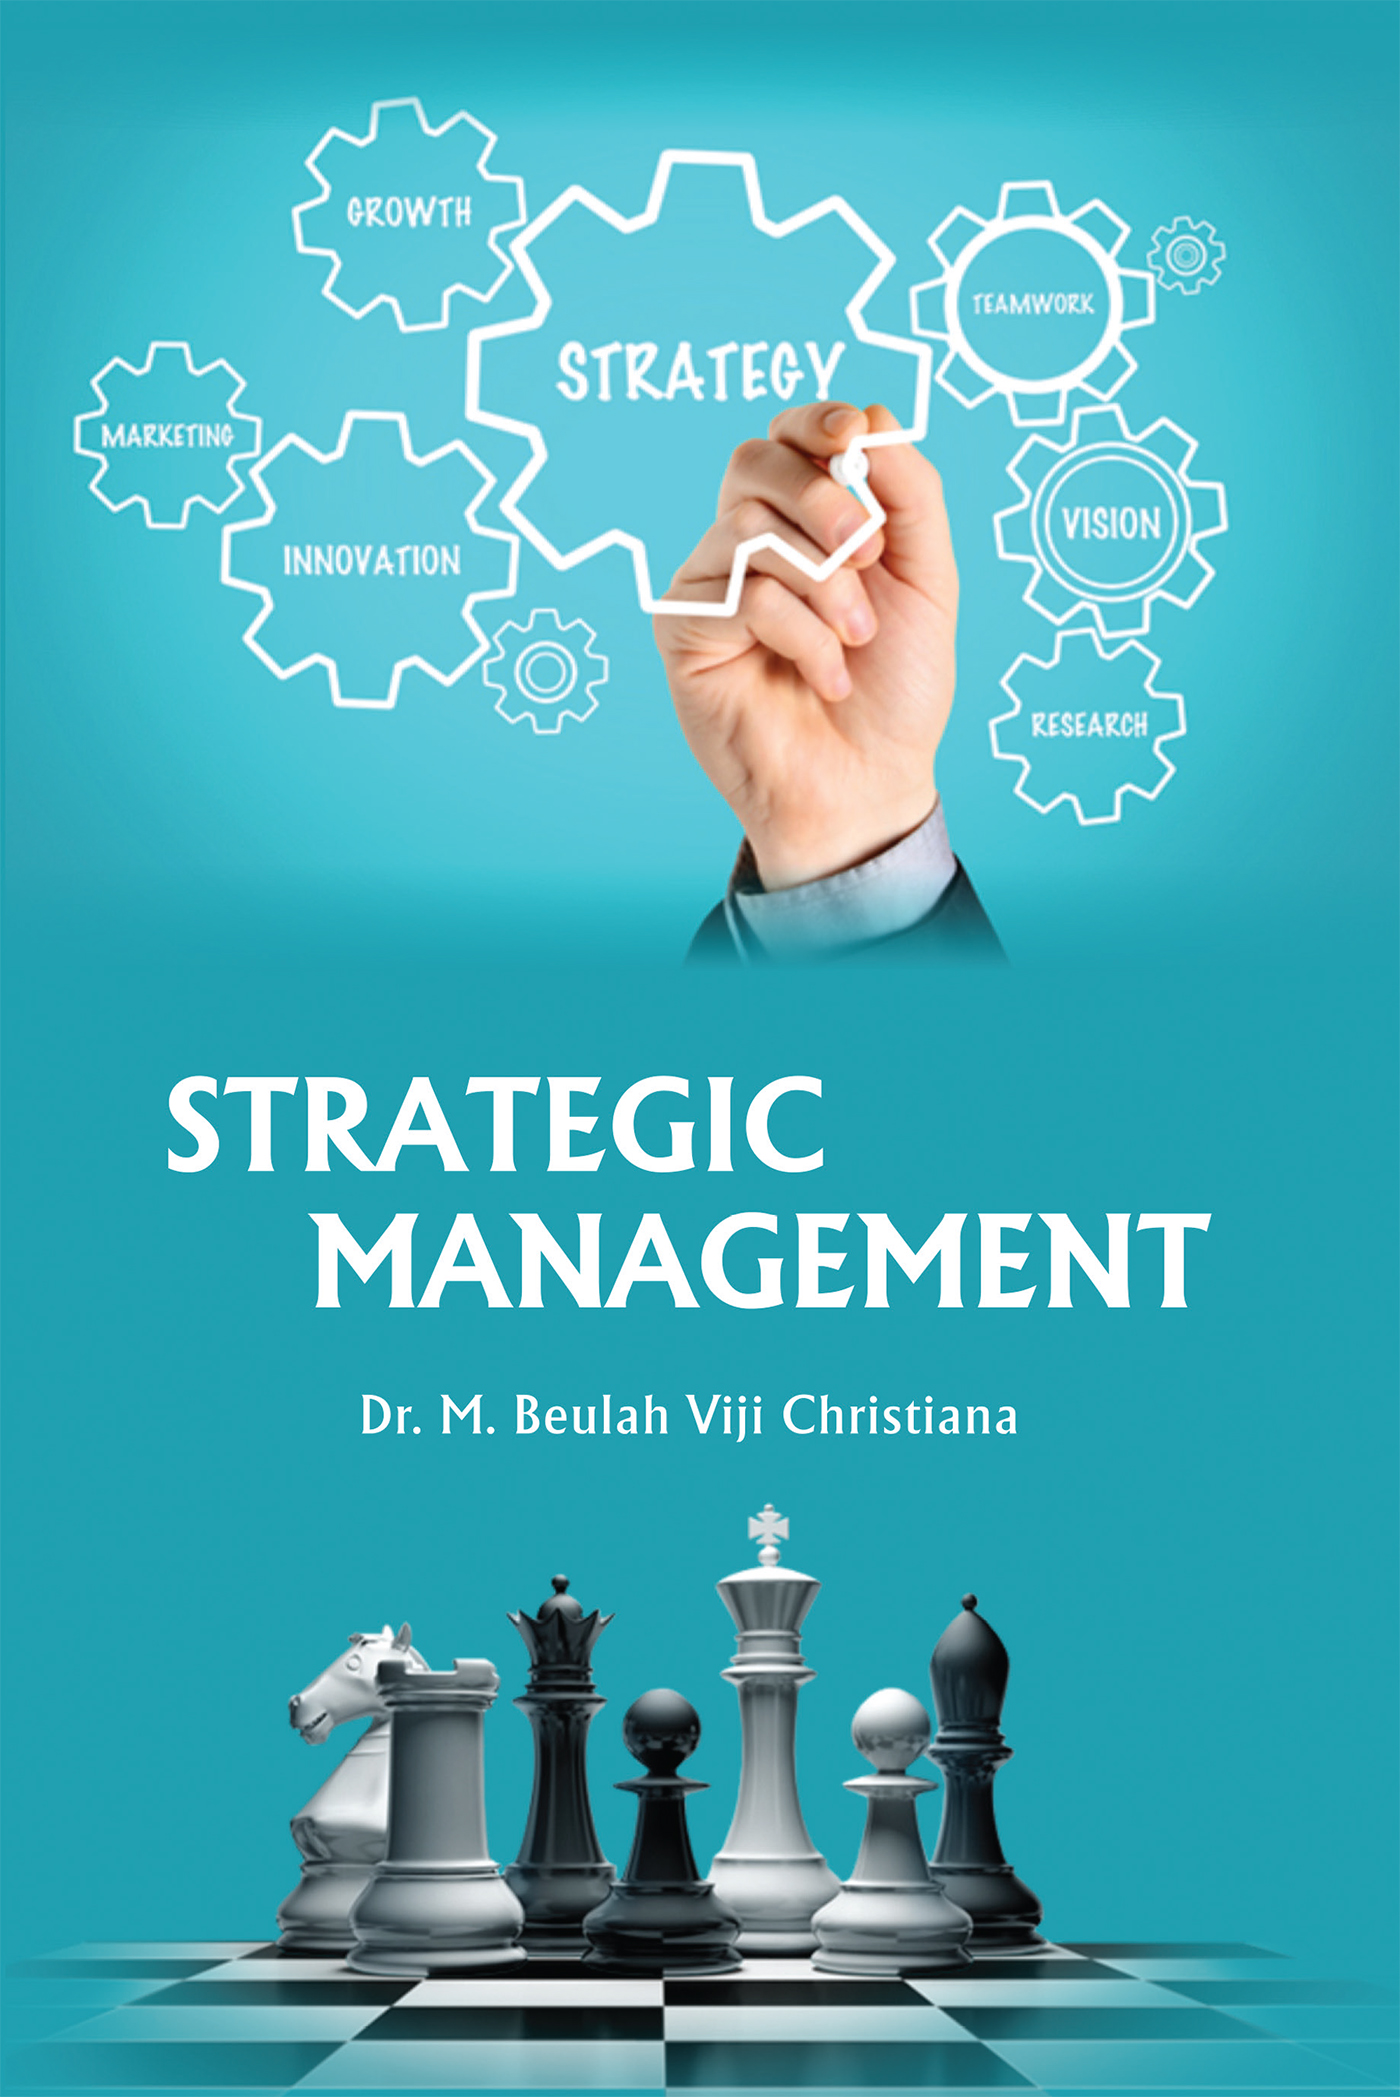 what are the most trending research topics in strategic management